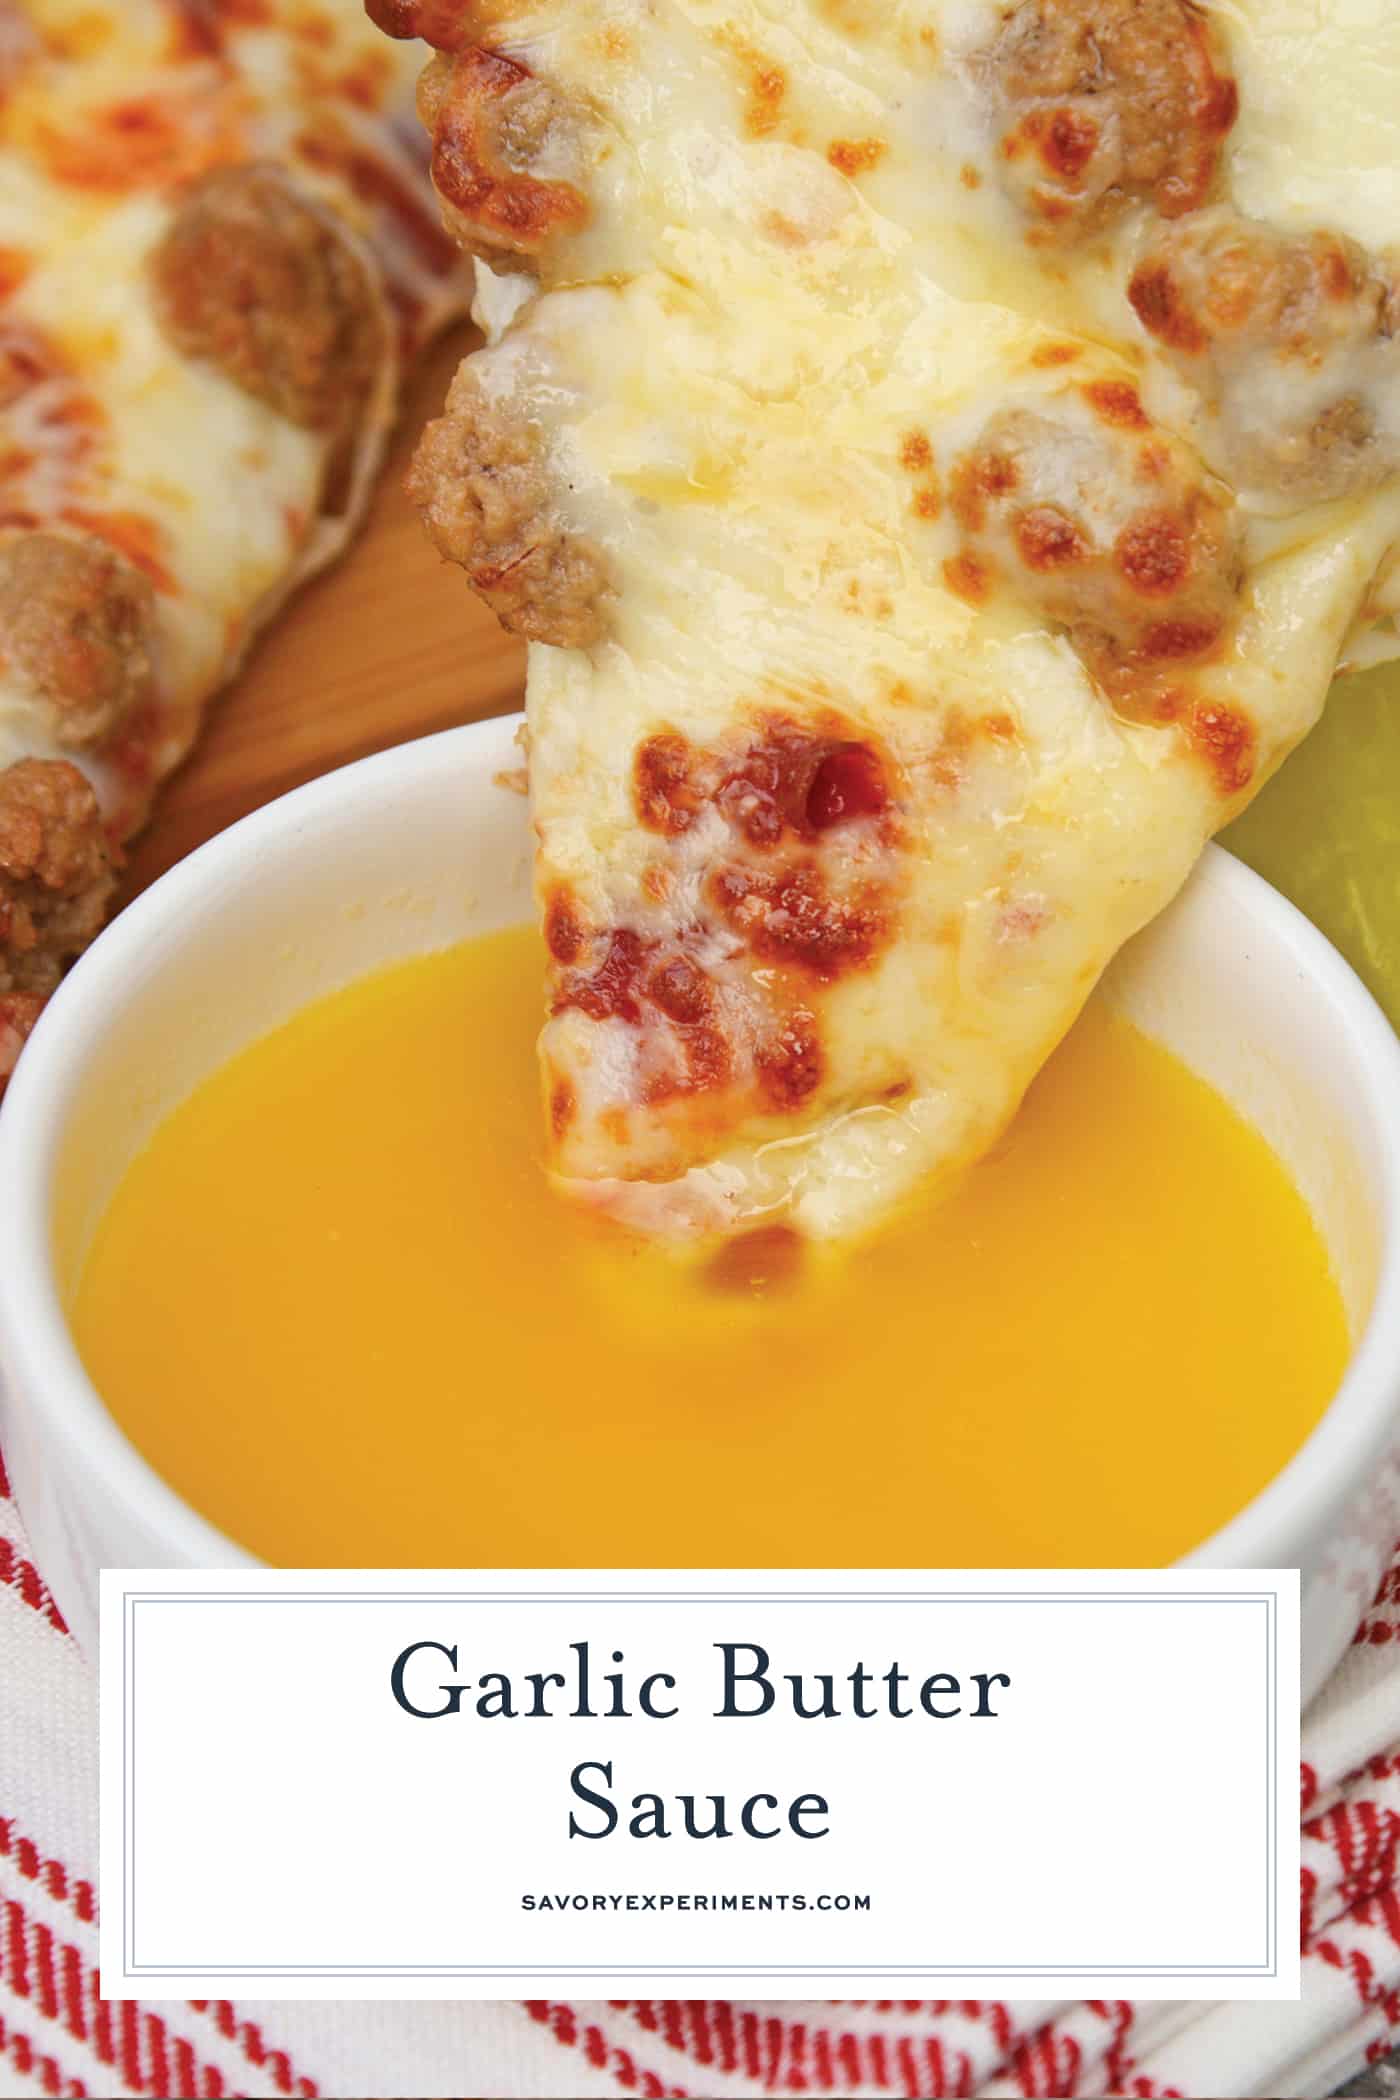 Pizza dipping into garlic butter sauce